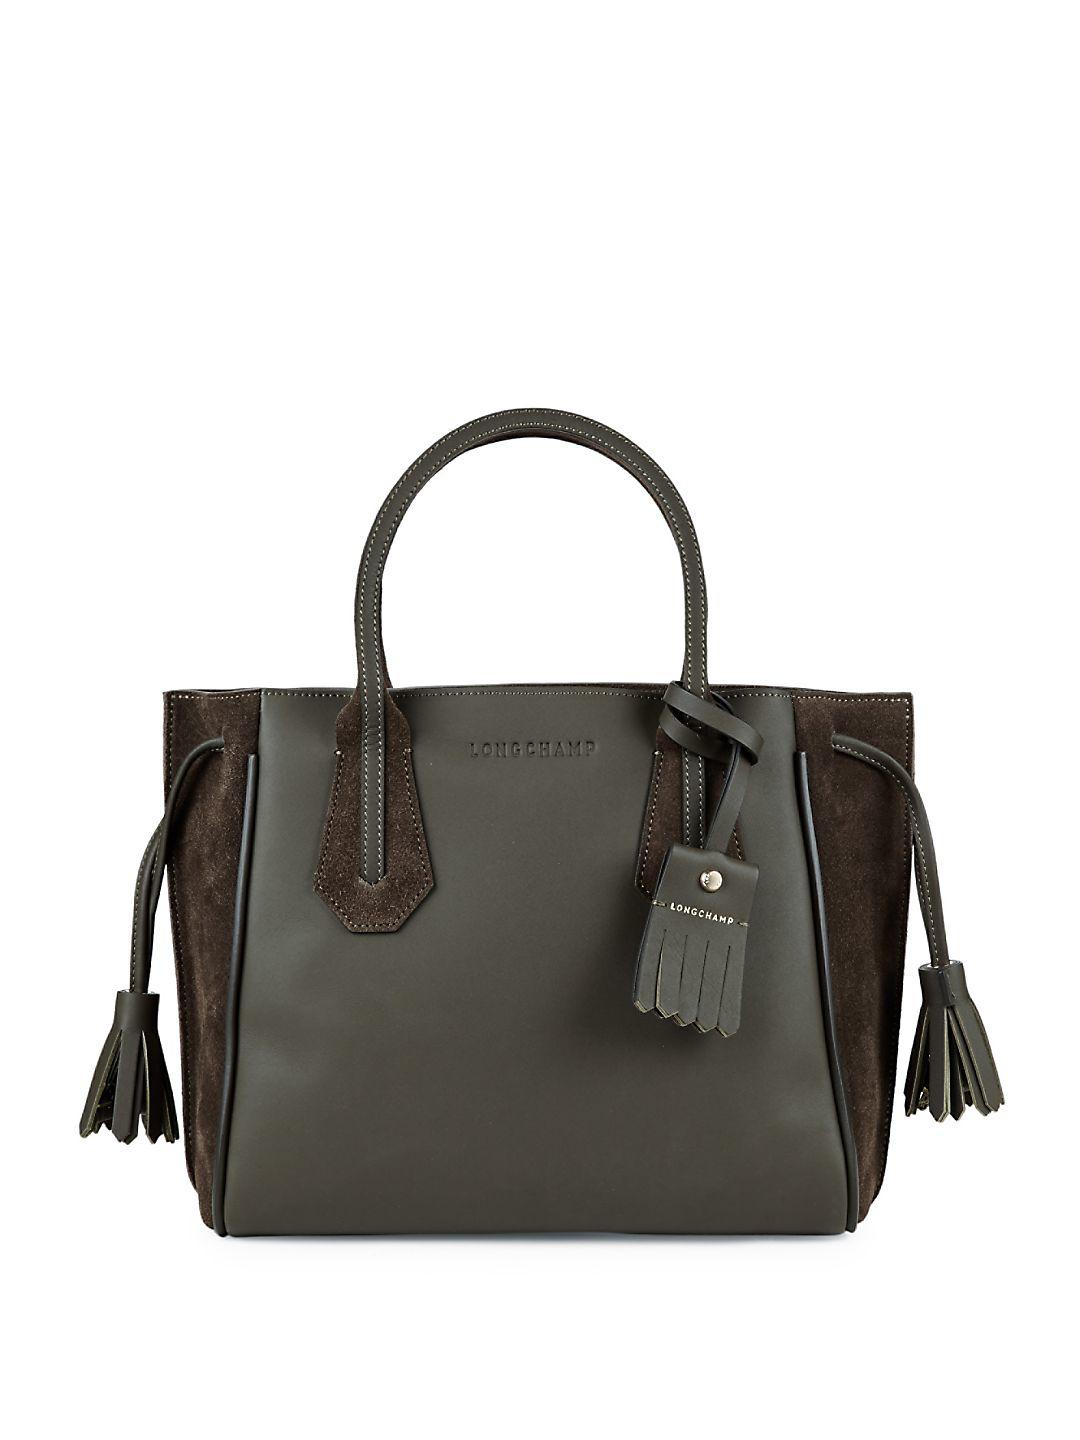 Longchamp Penelope Small Leather Tote 